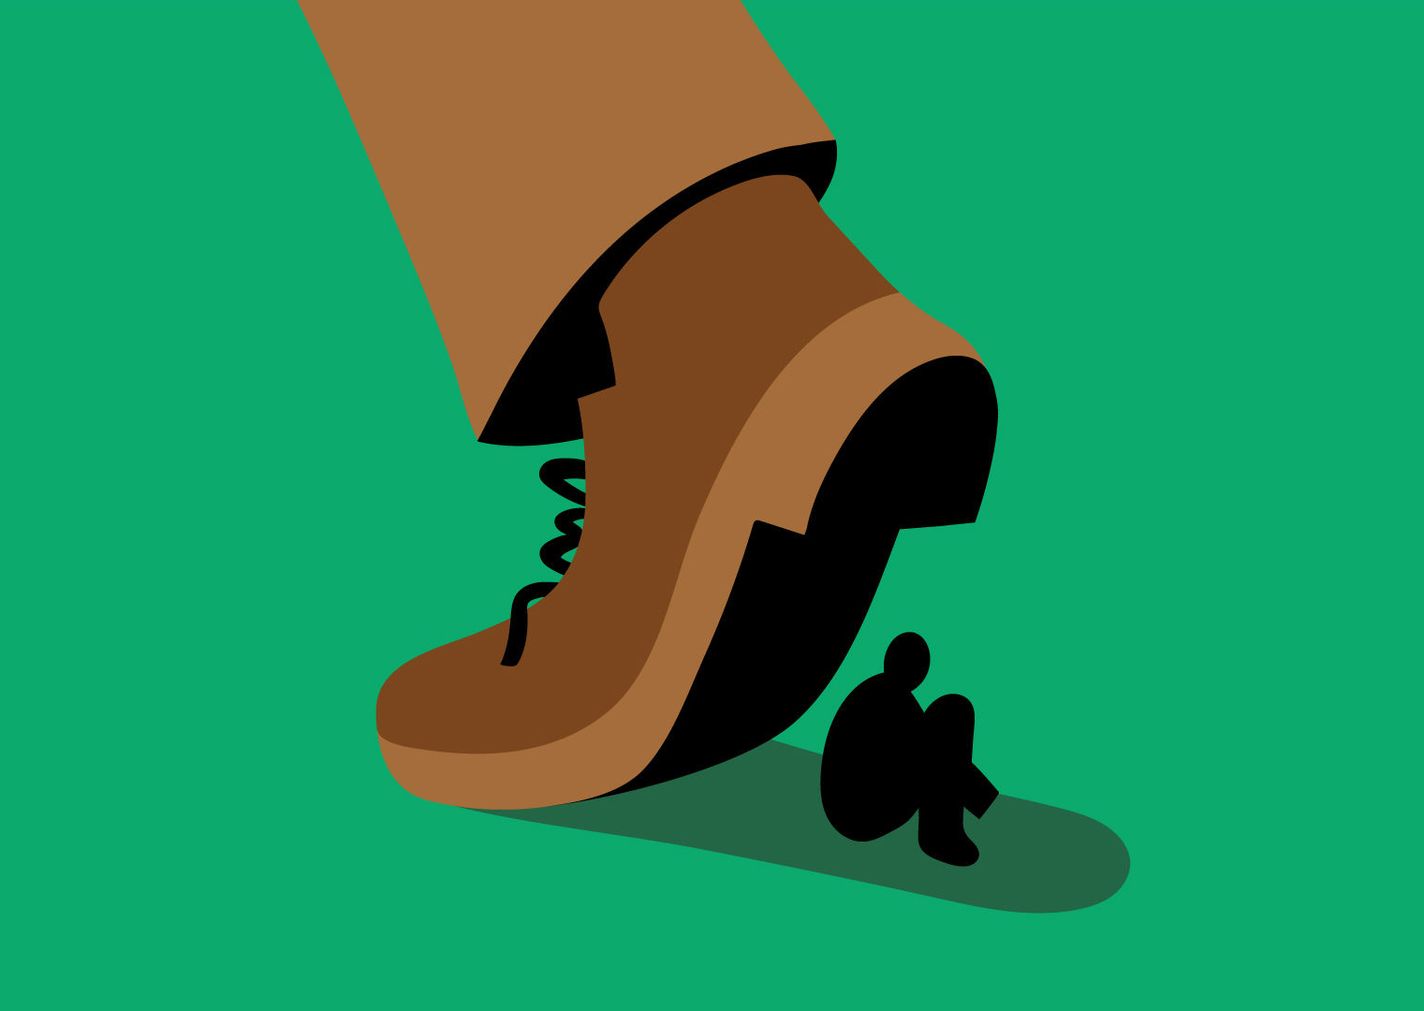 An illustration a small person sitting in the shadow of the shoe of a large person.